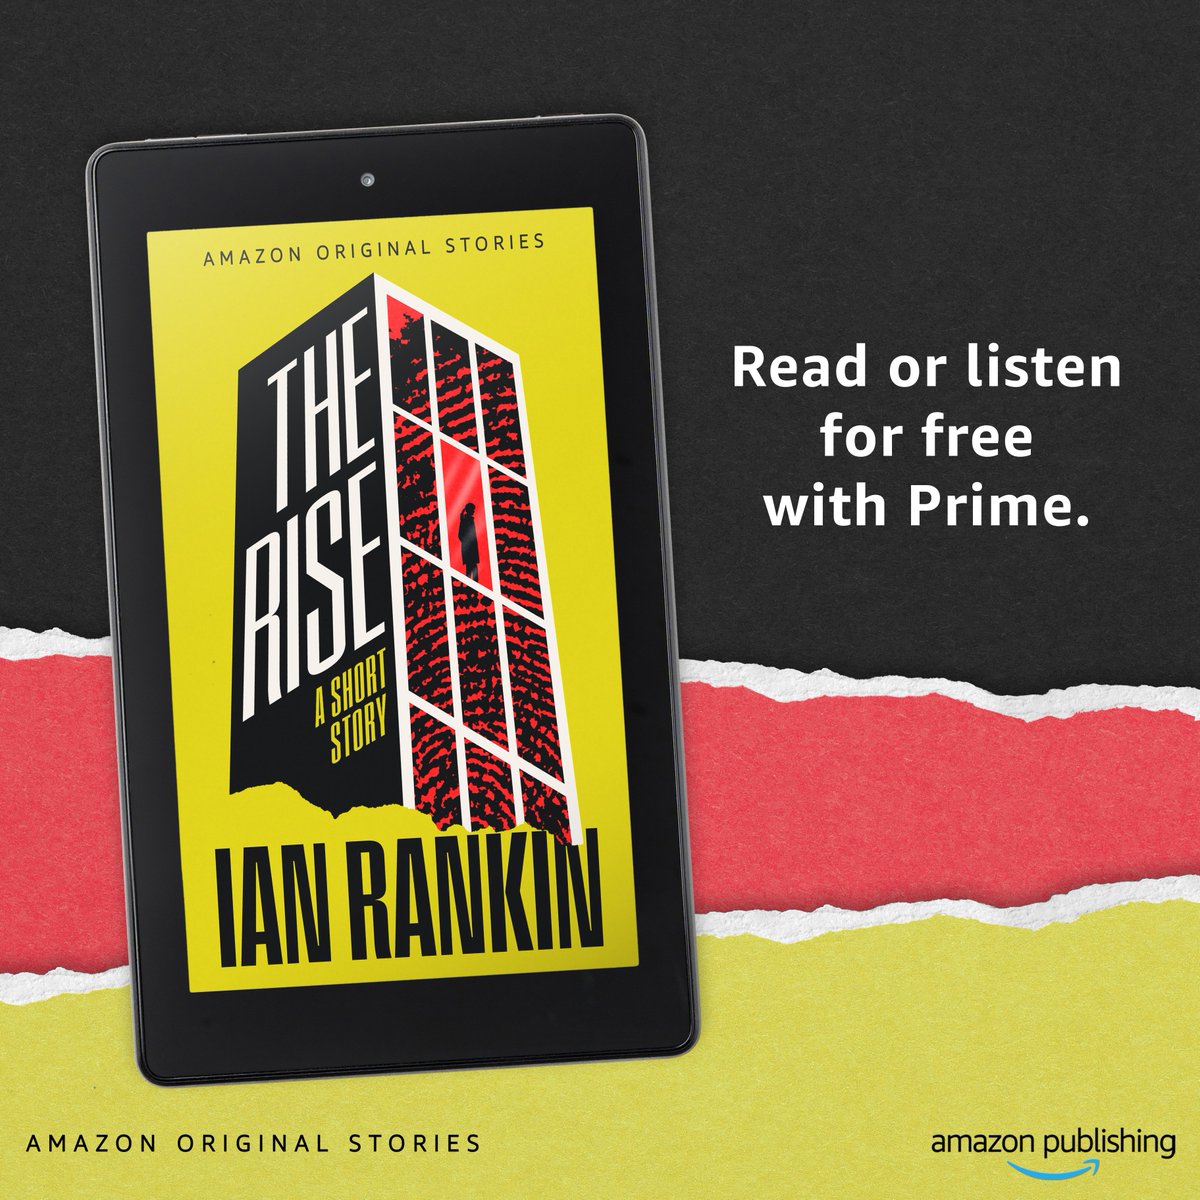 Everyone’s a suspect. Everyone’s untouchable. From bestselling author @Beathhigh comes a short murder mystery at London’s most exclusive address. Read and listen free with Prime. Amazon.com/TheRise